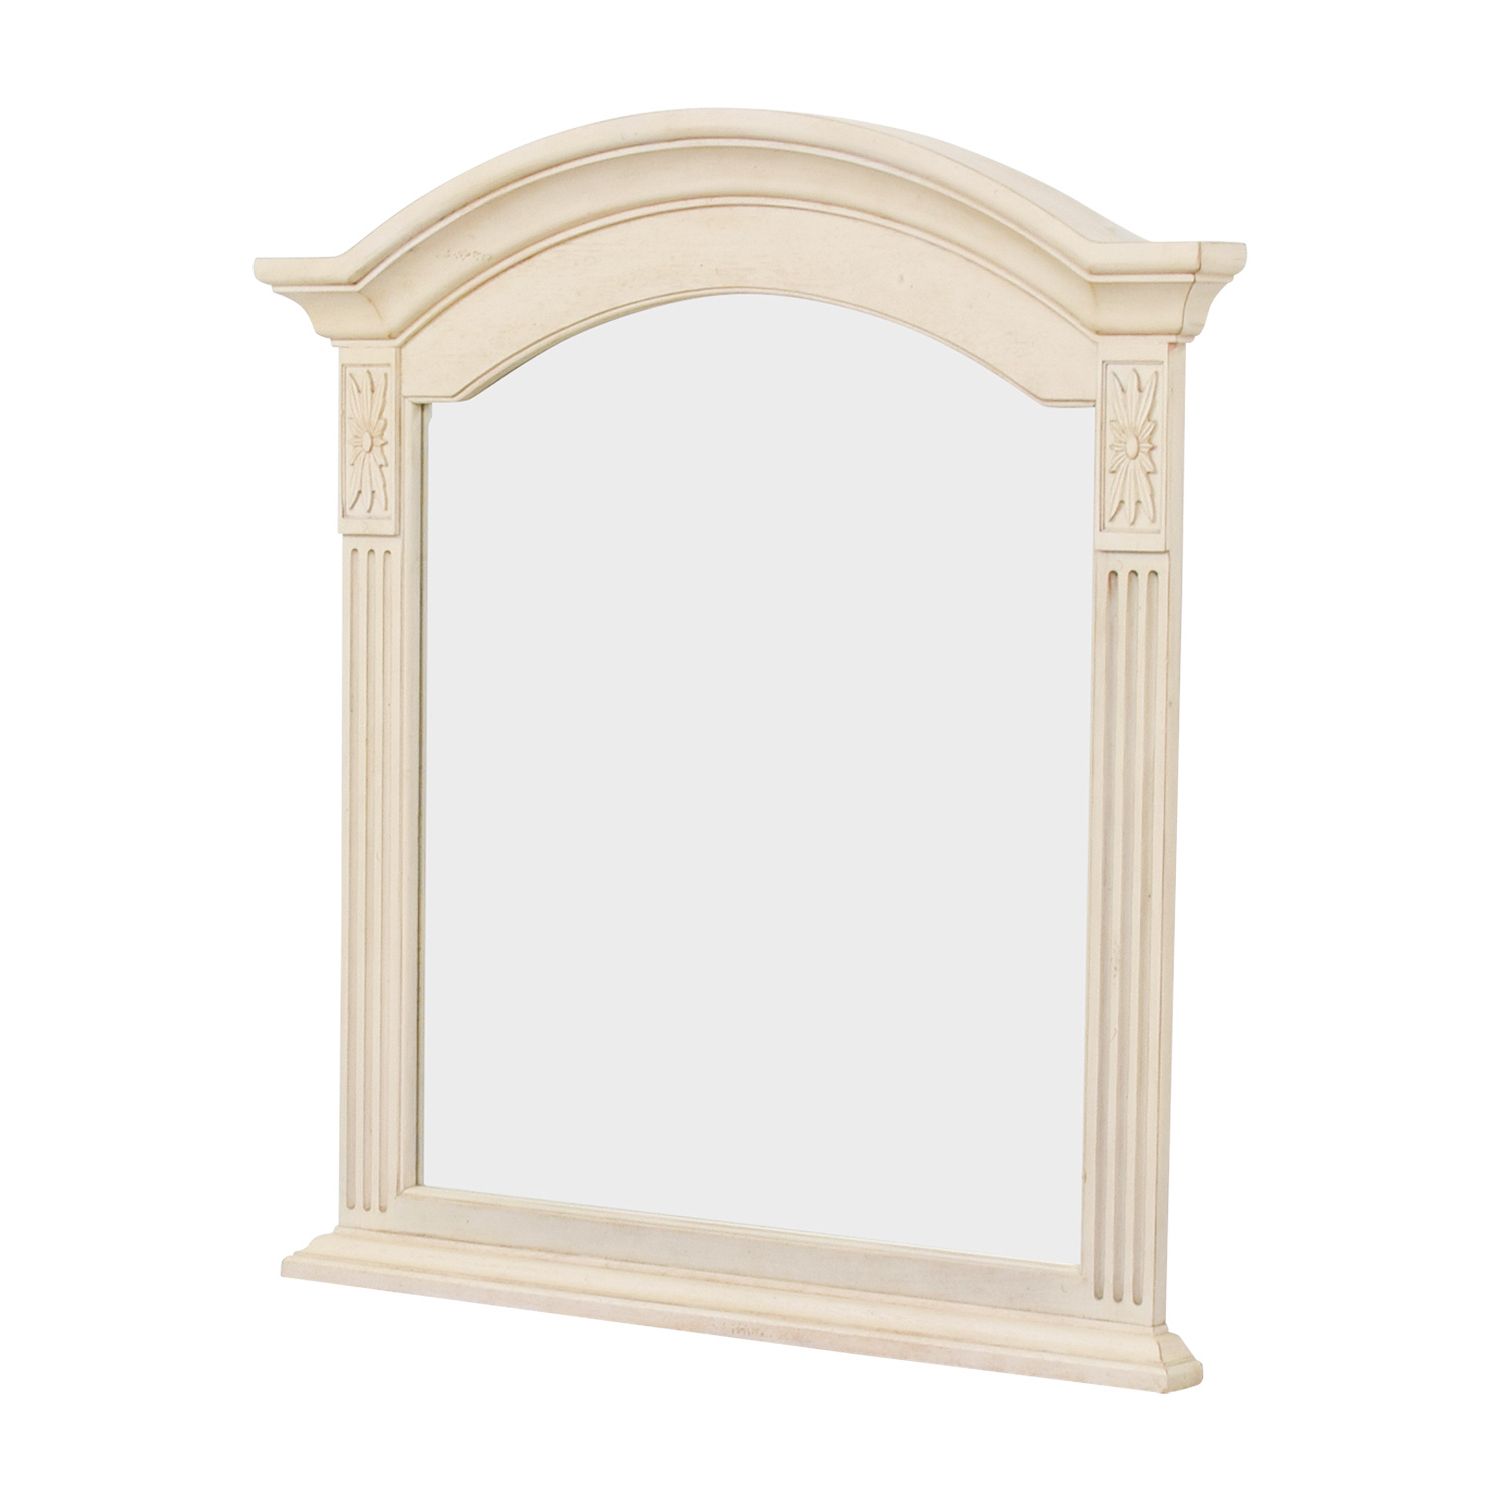 [%90% Off – Domain Domain Large Framed Mirror / Decor Within Famous Large Fancy Wall Mirrors|large Fancy Wall Mirrors Within Recent 90% Off – Domain Domain Large Framed Mirror / Decor|2020 Large Fancy Wall Mirrors With Regard To 90% Off – Domain Domain Large Framed Mirror / Decor|popular 90% Off – Domain Domain Large Framed Mirror / Decor Inside Large Fancy Wall Mirrors%] (View 12 of 20)